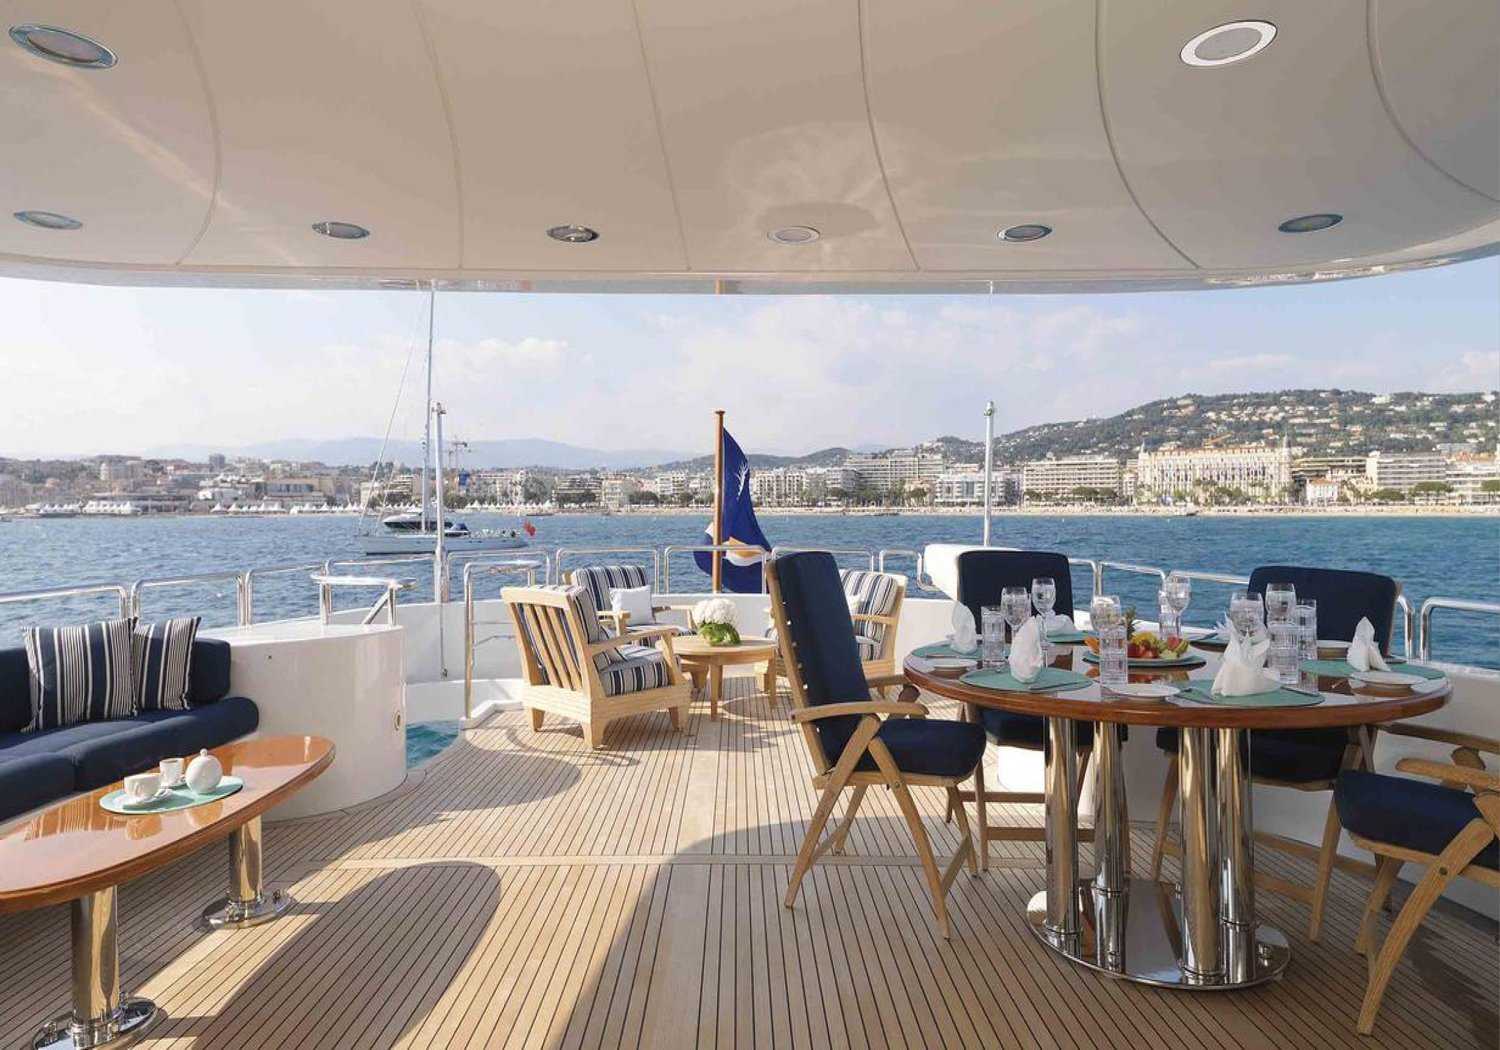 Karen Lynn Interior Design Yacht Distraction N 4 - Karen Lynn Interiors - Interior Design for Yacht, Aircrafts and Residential Projects